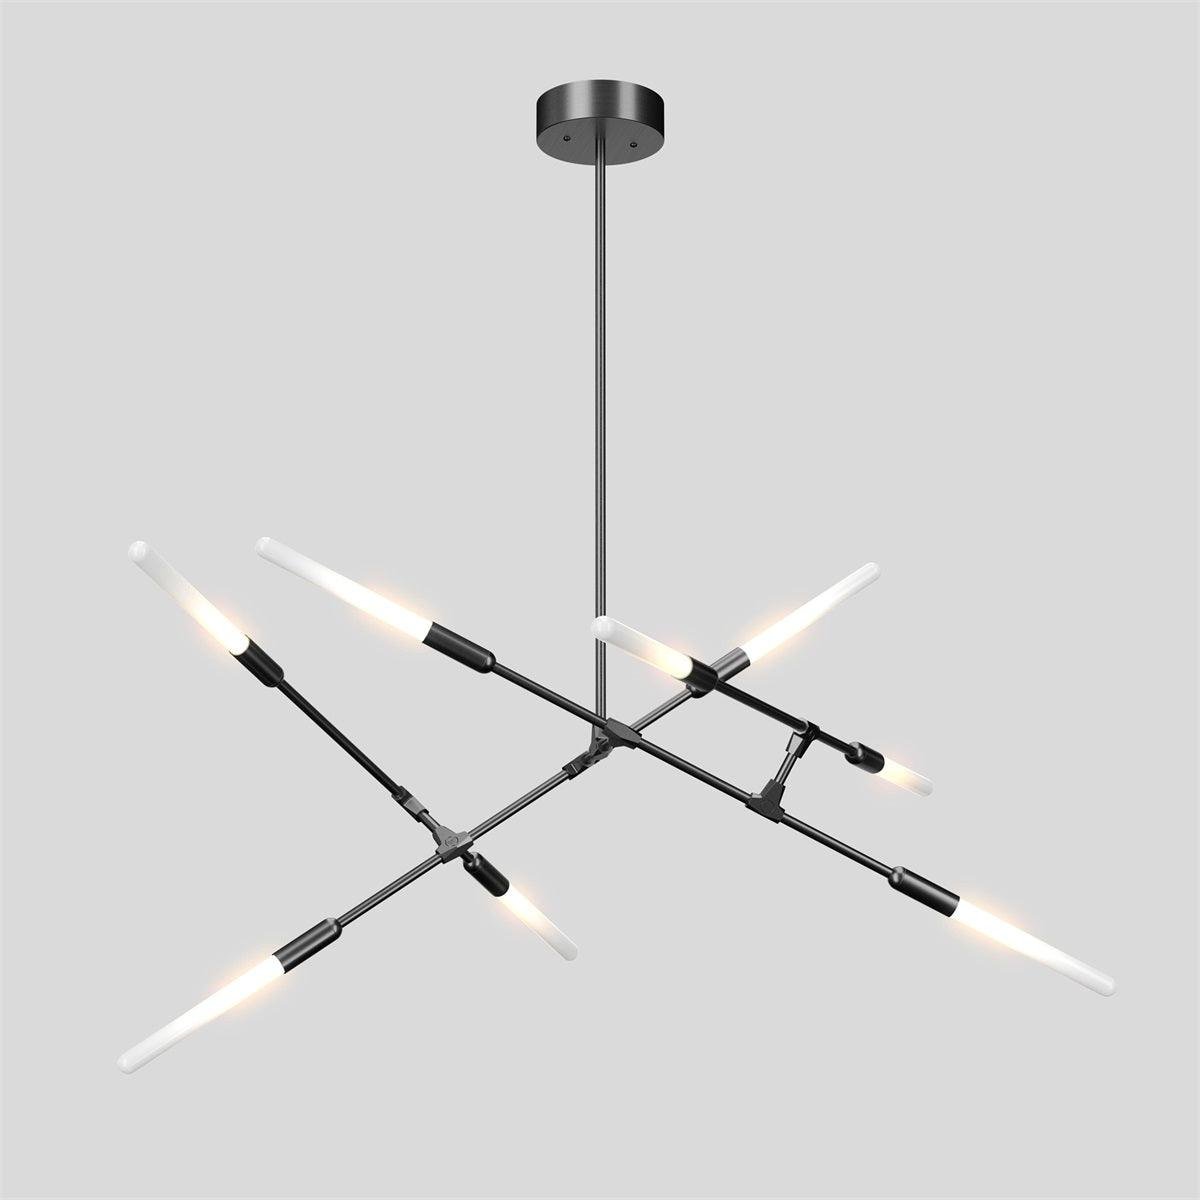 Black Dawn Chandeliers Horizontal with 8heads measuring ∅ 48.8″ x H 26.8″